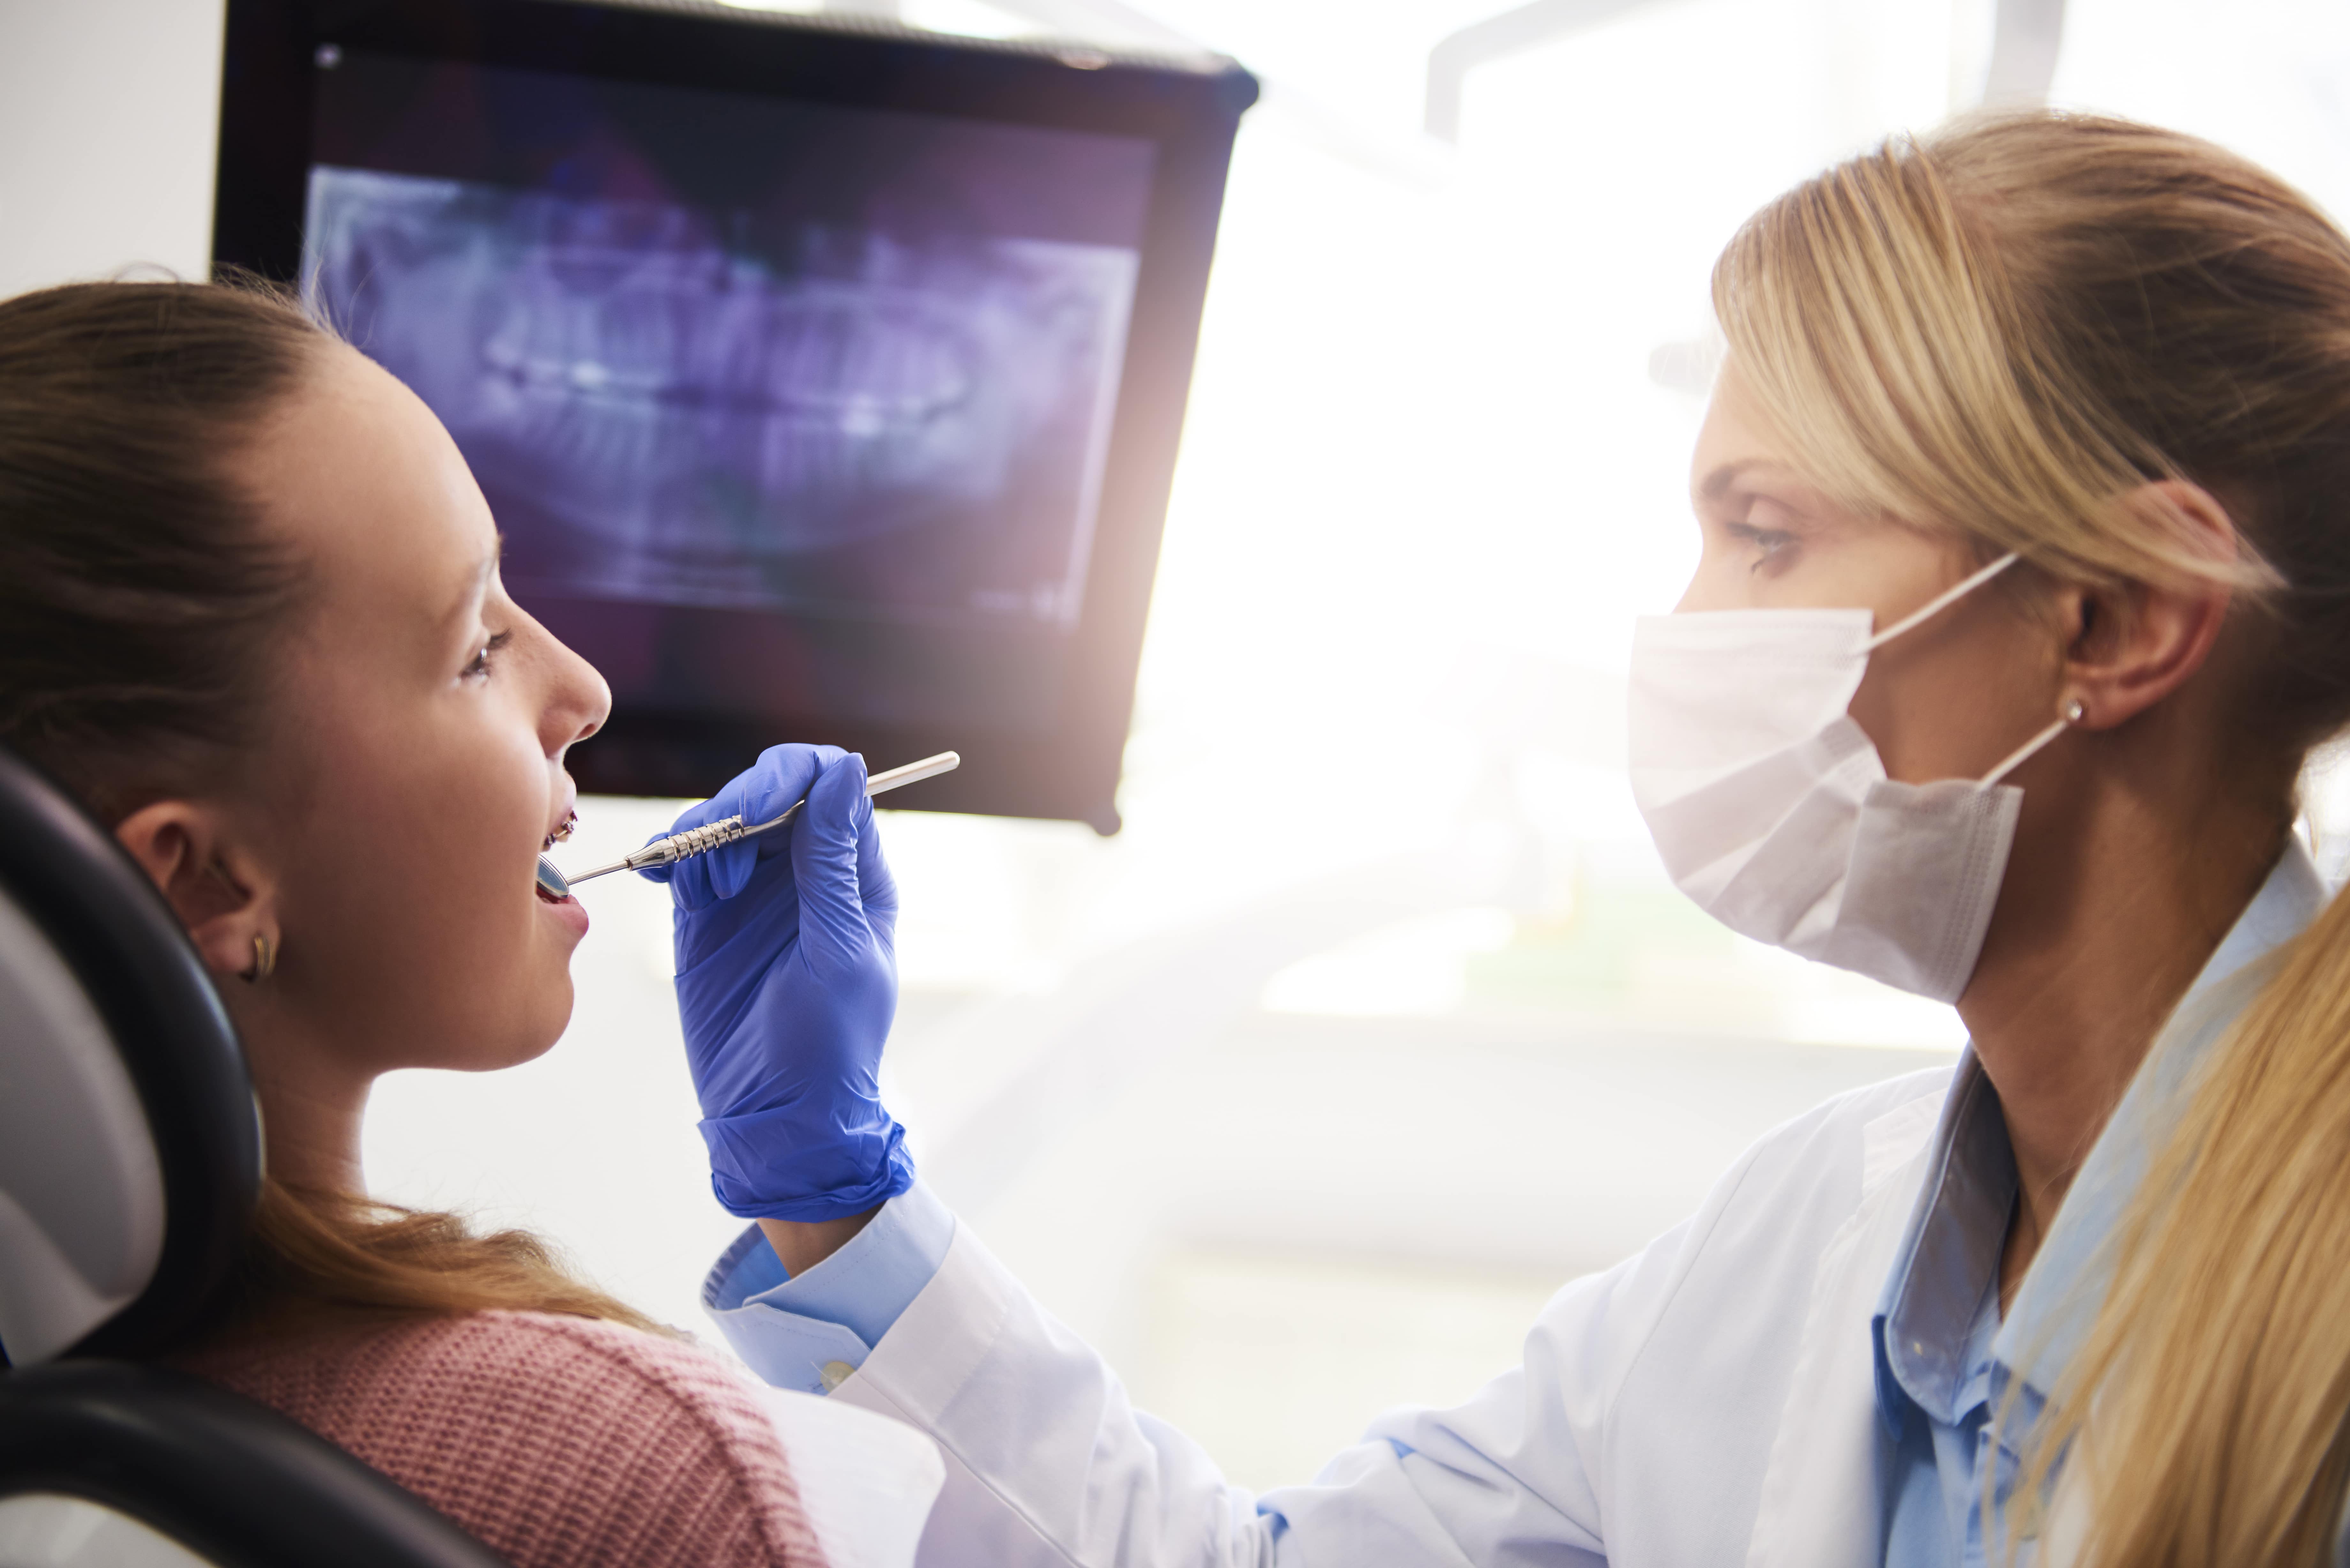 A physician examines a patient based on dental imaging results.